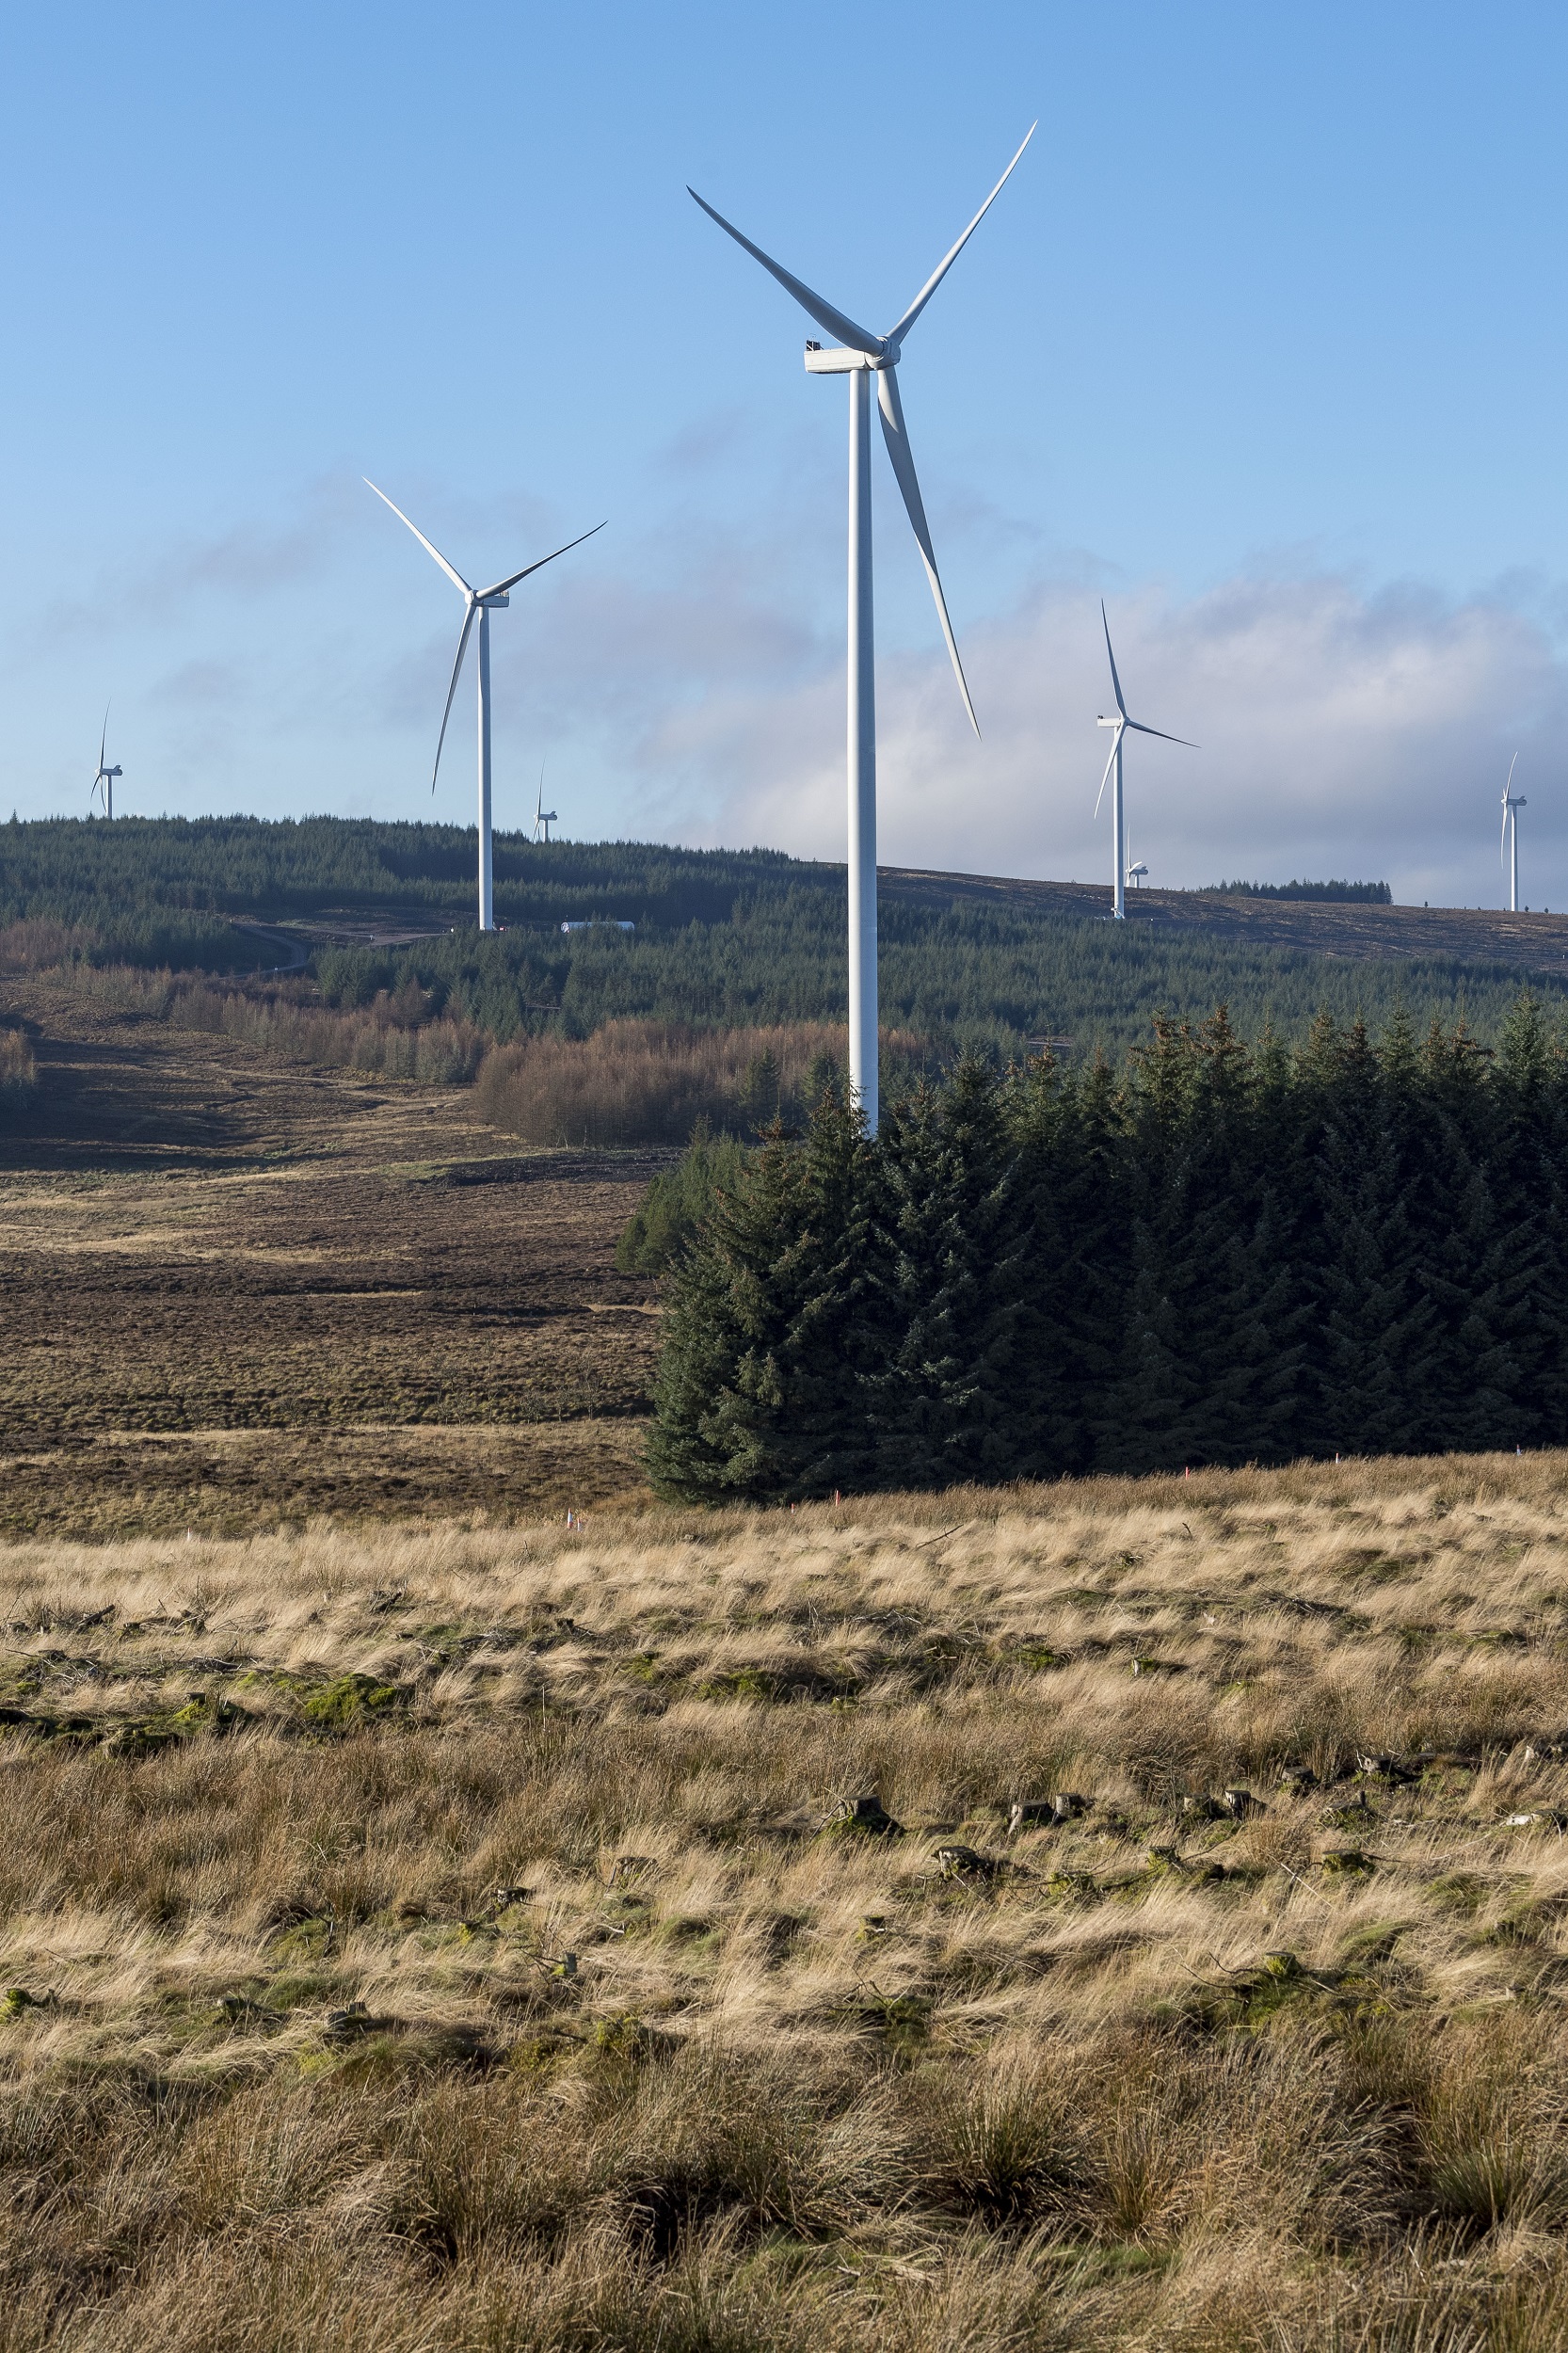 First Minister launches UK's tallest wind turbine